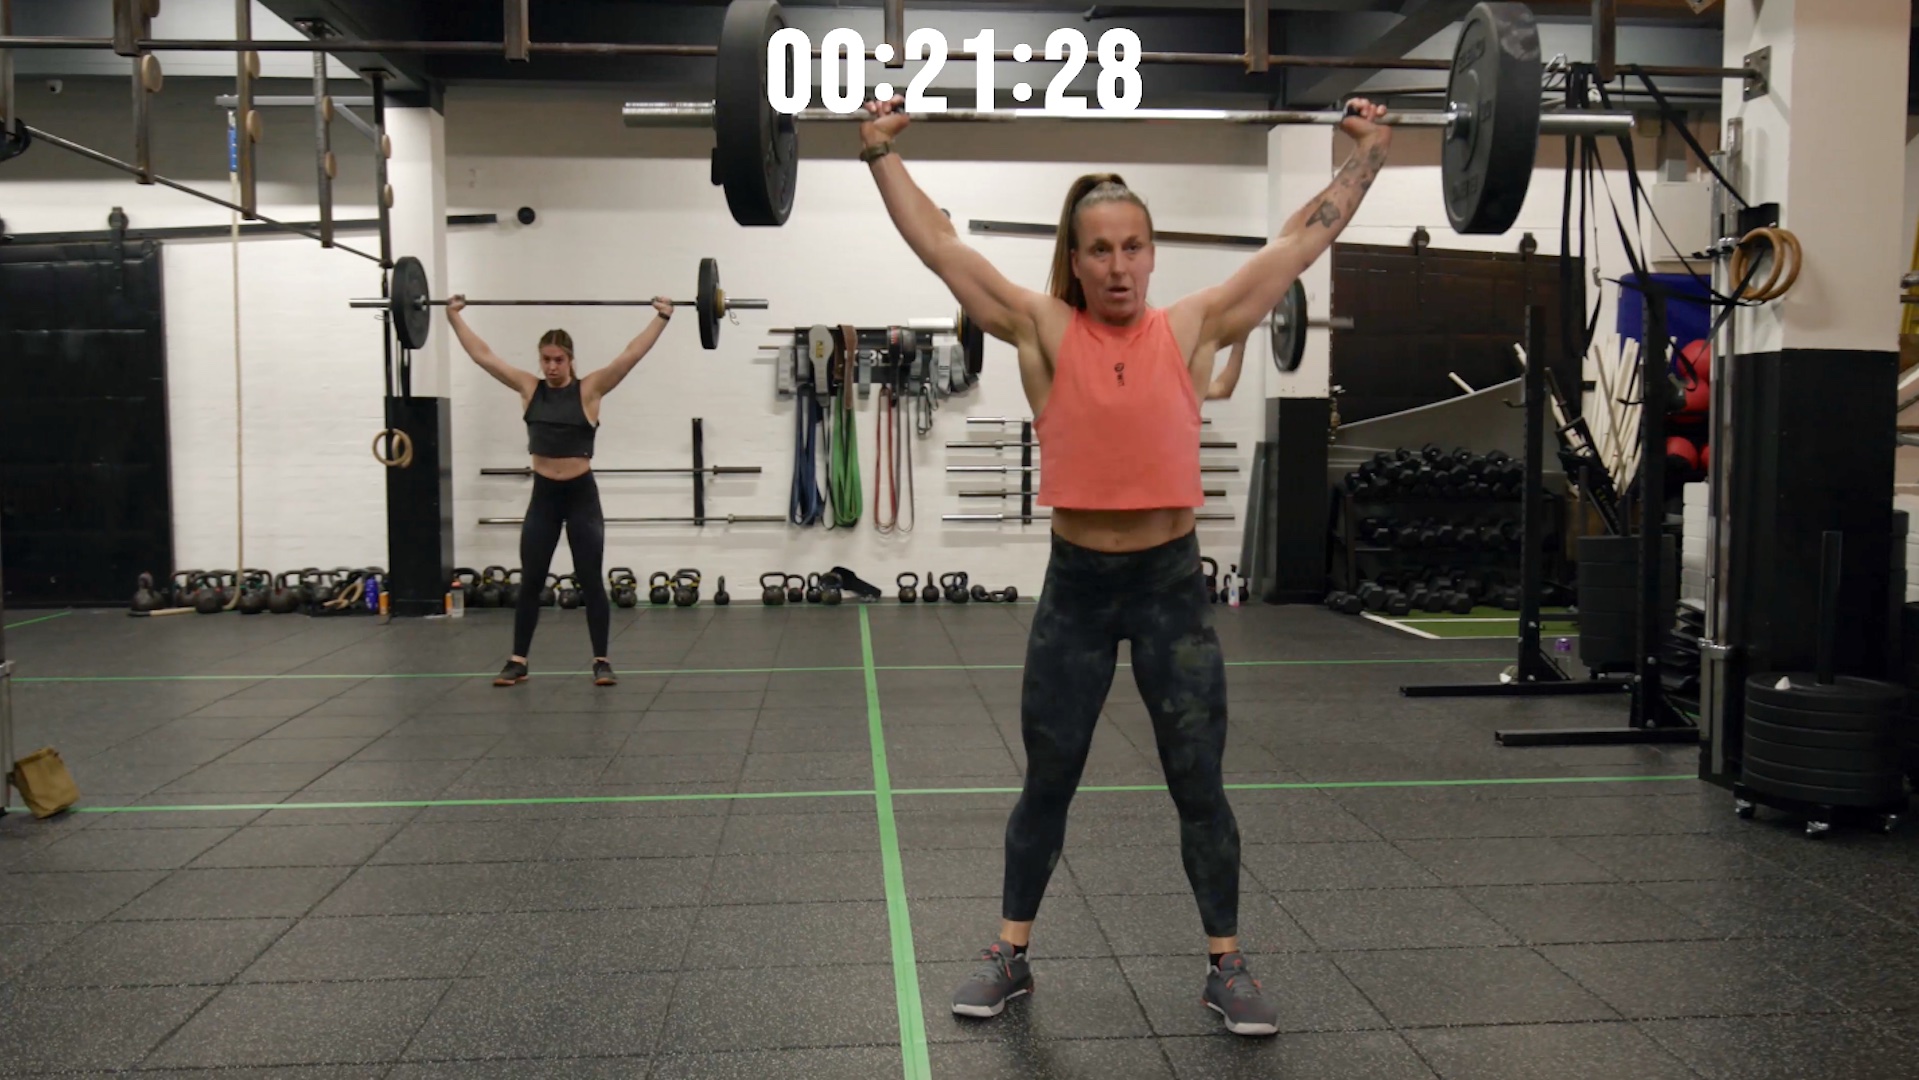 5 Day Helen Crossfit Workout for Push Pull Legs